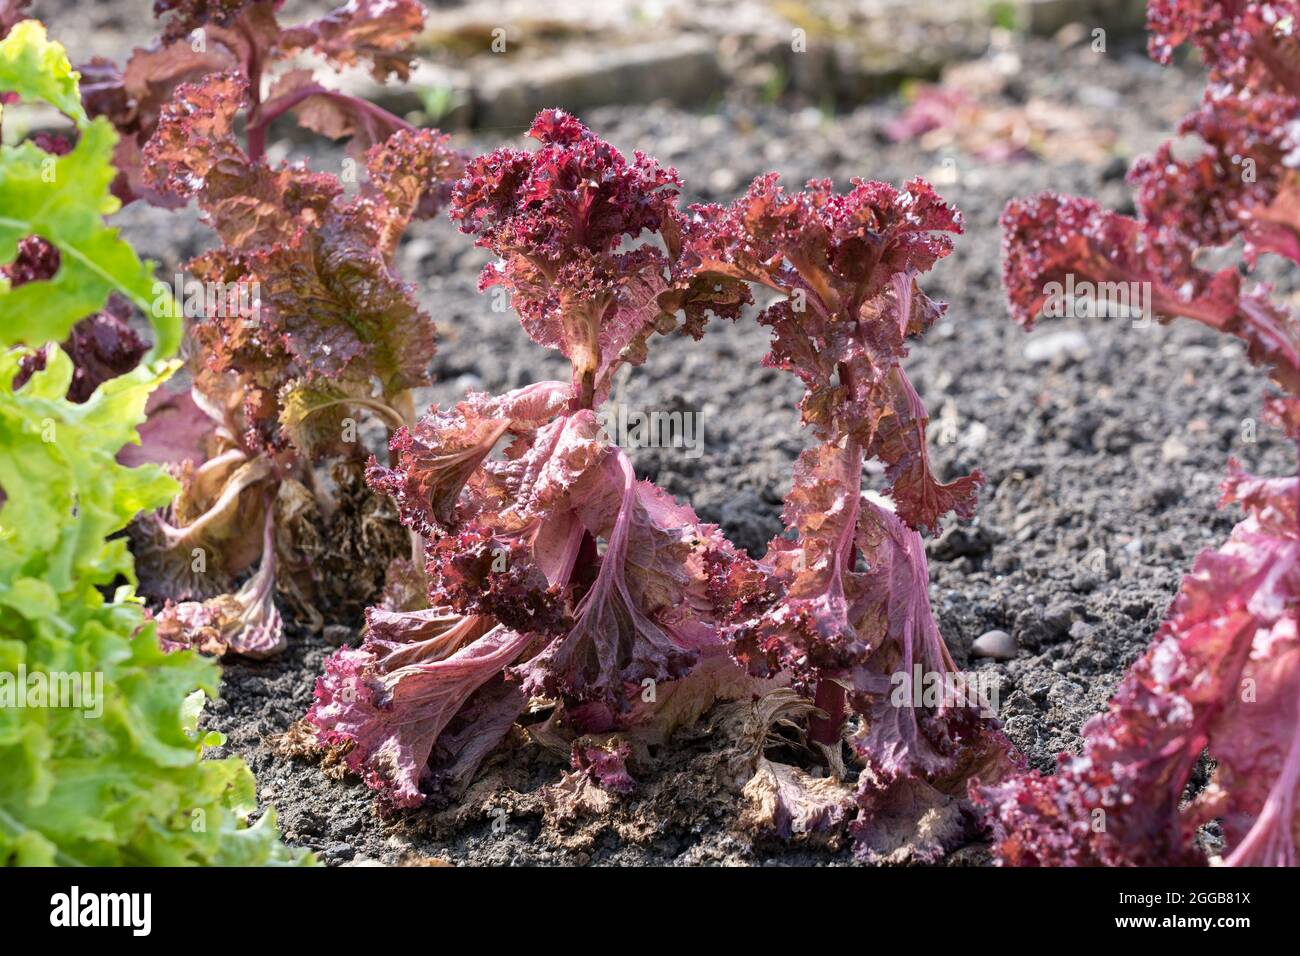 Lettuce lollo rossa with red leaves growing in a vegetable patch in a UK garden in August Stock Photo